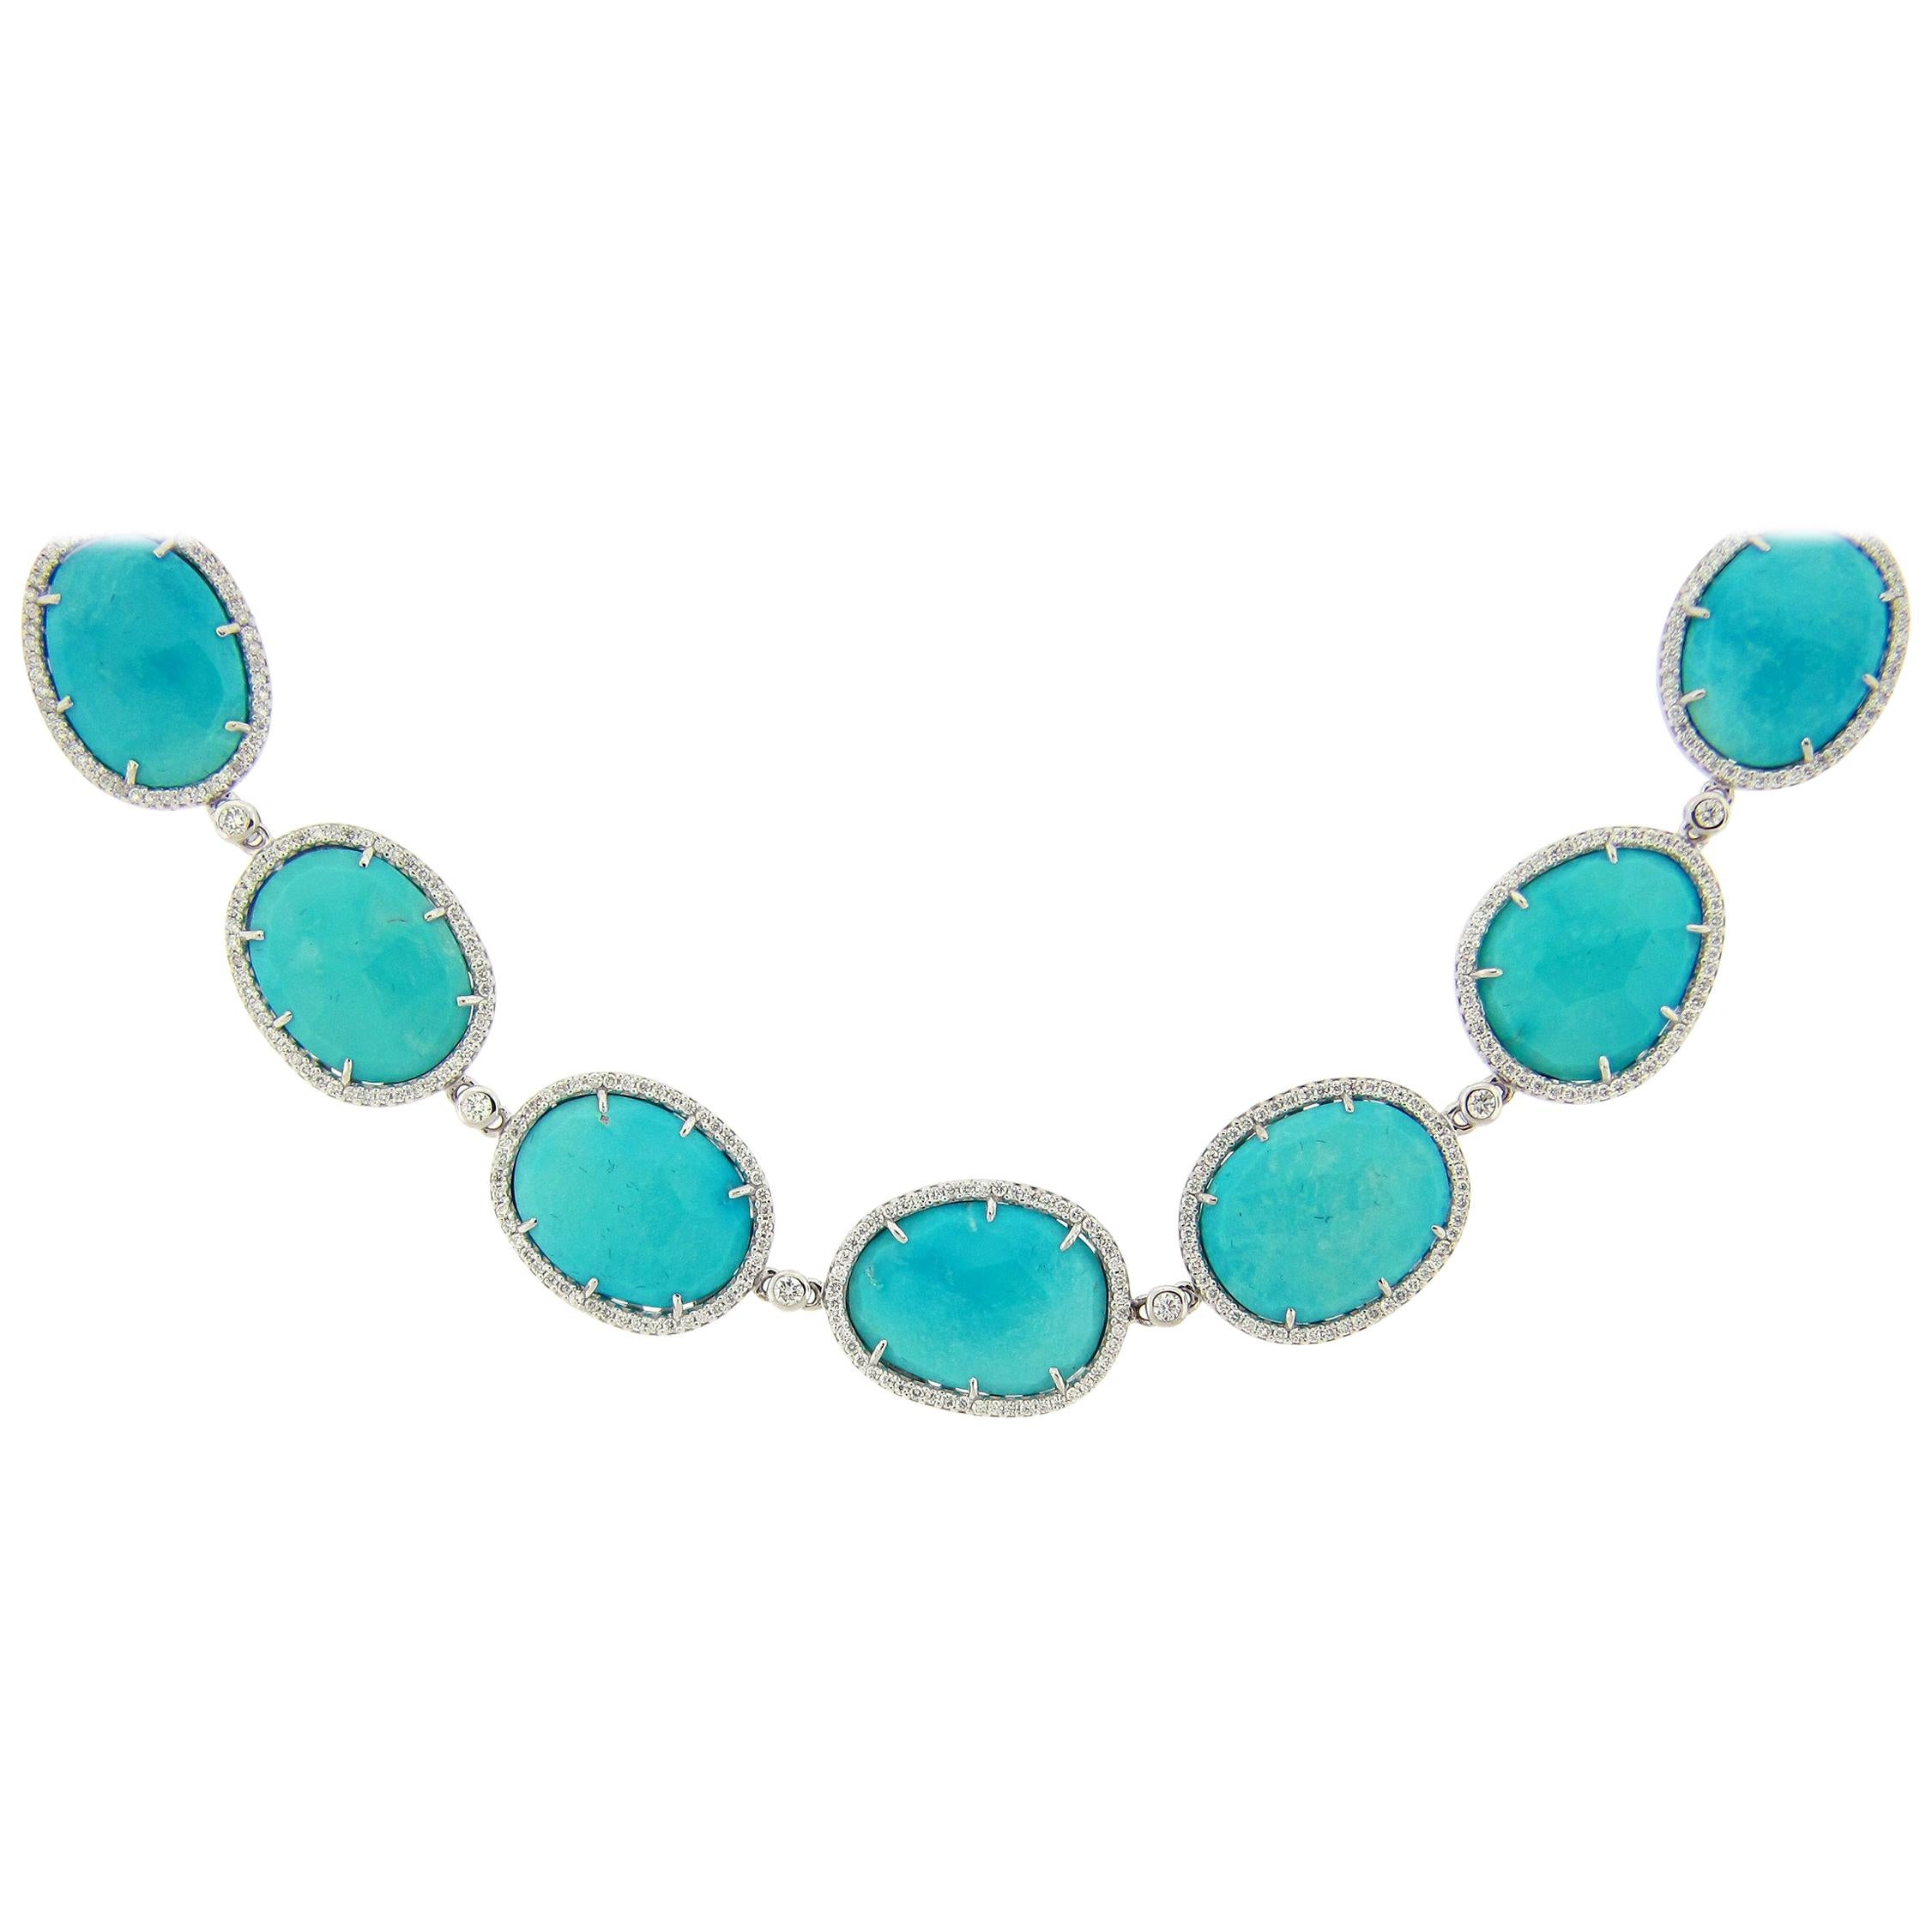 86.97 Carat Rose Cut Turquoise and Diamond Necklace